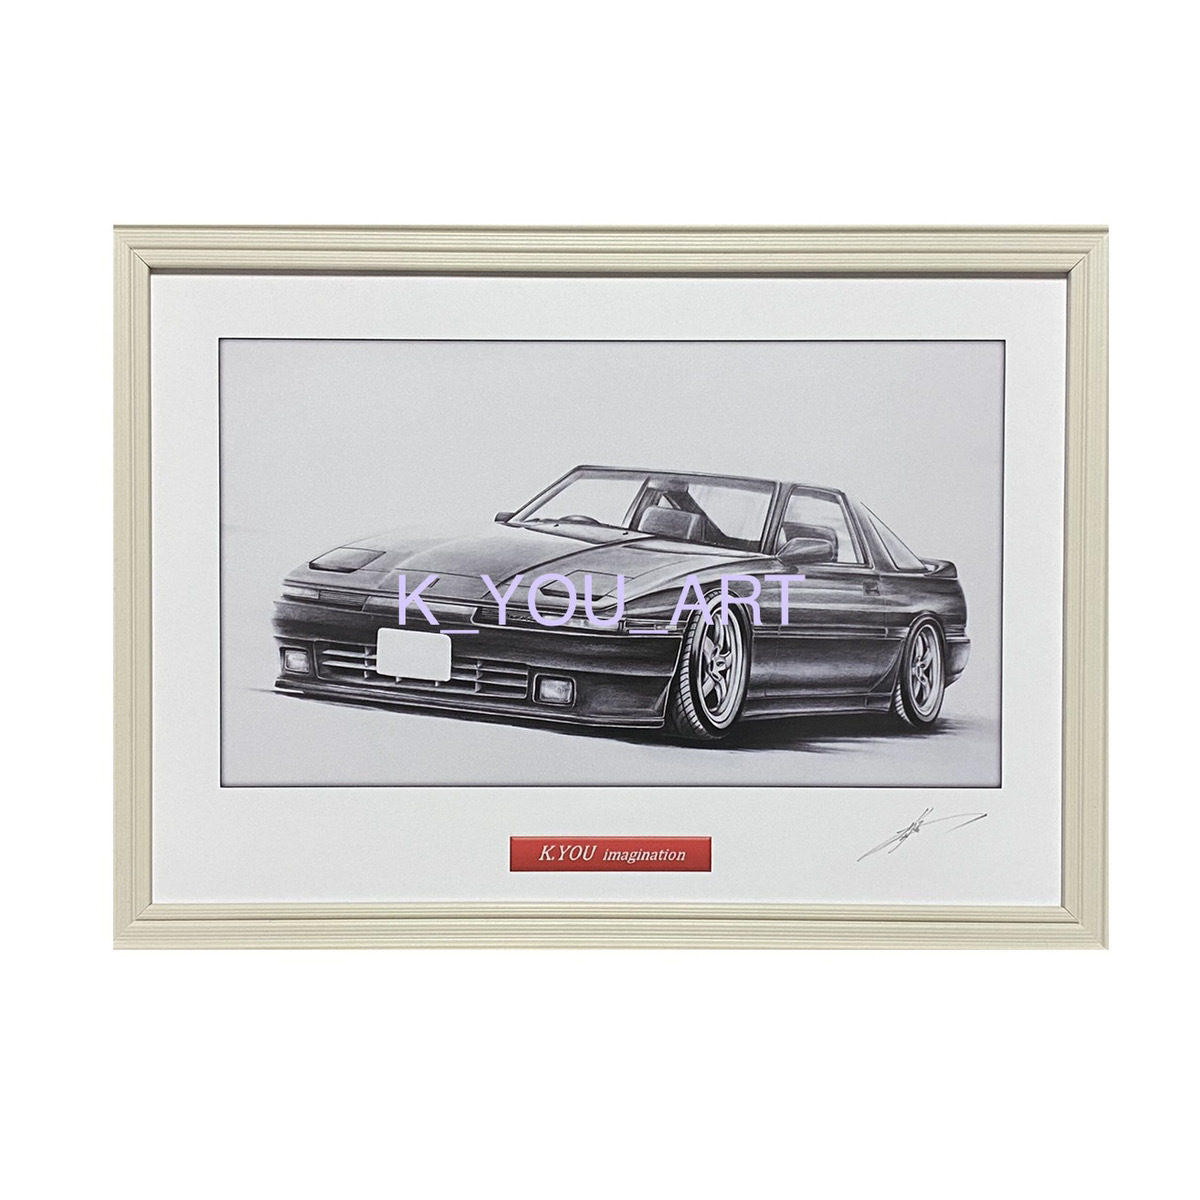  Toyota TOYOTA Supra A70 [ pencil sketch ] famous car old car illustration A4 size amount attaching autographed 